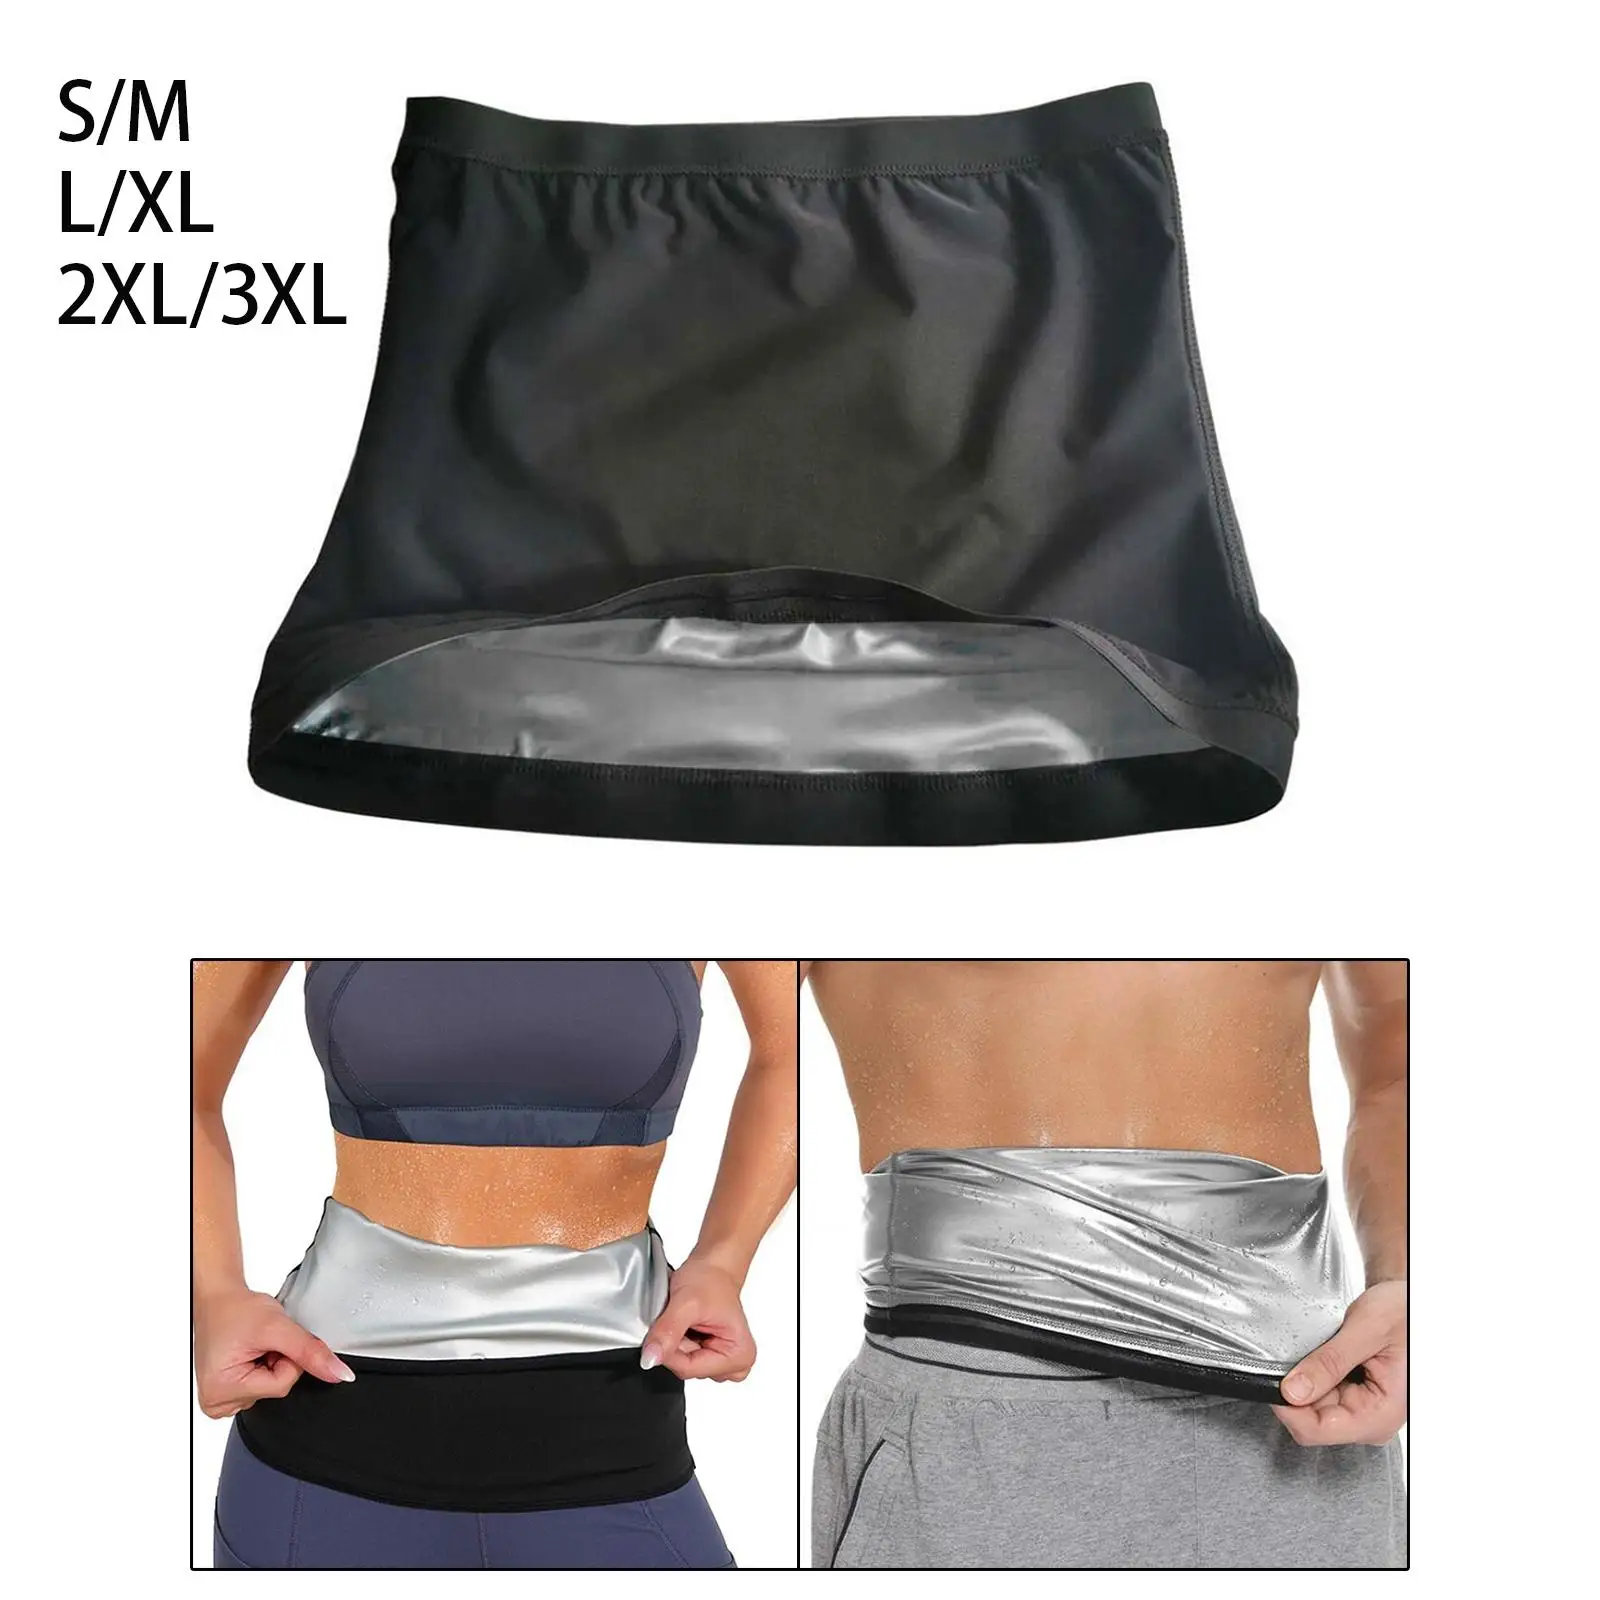 Waist Trimmer Toning Belt Abdominal Trainer Low Back and Abdominal Support Sauna Belt for Yoga Workout Pilates Fitness Exercise